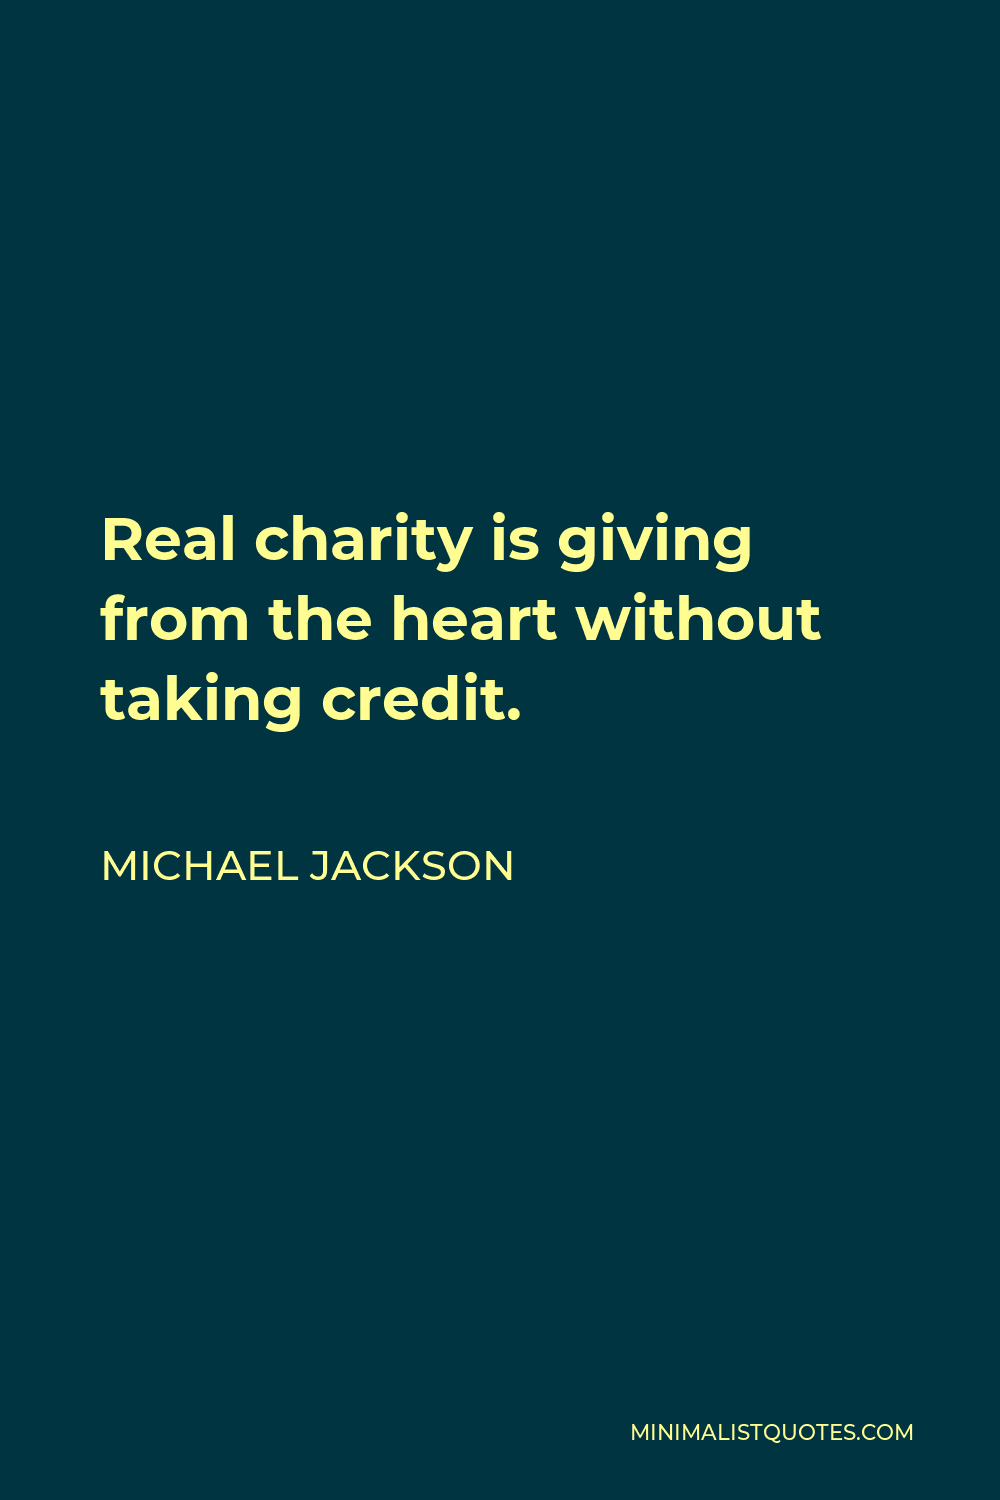 Michael Jackson Quote - Real charity is giving from the heart without taking credit.